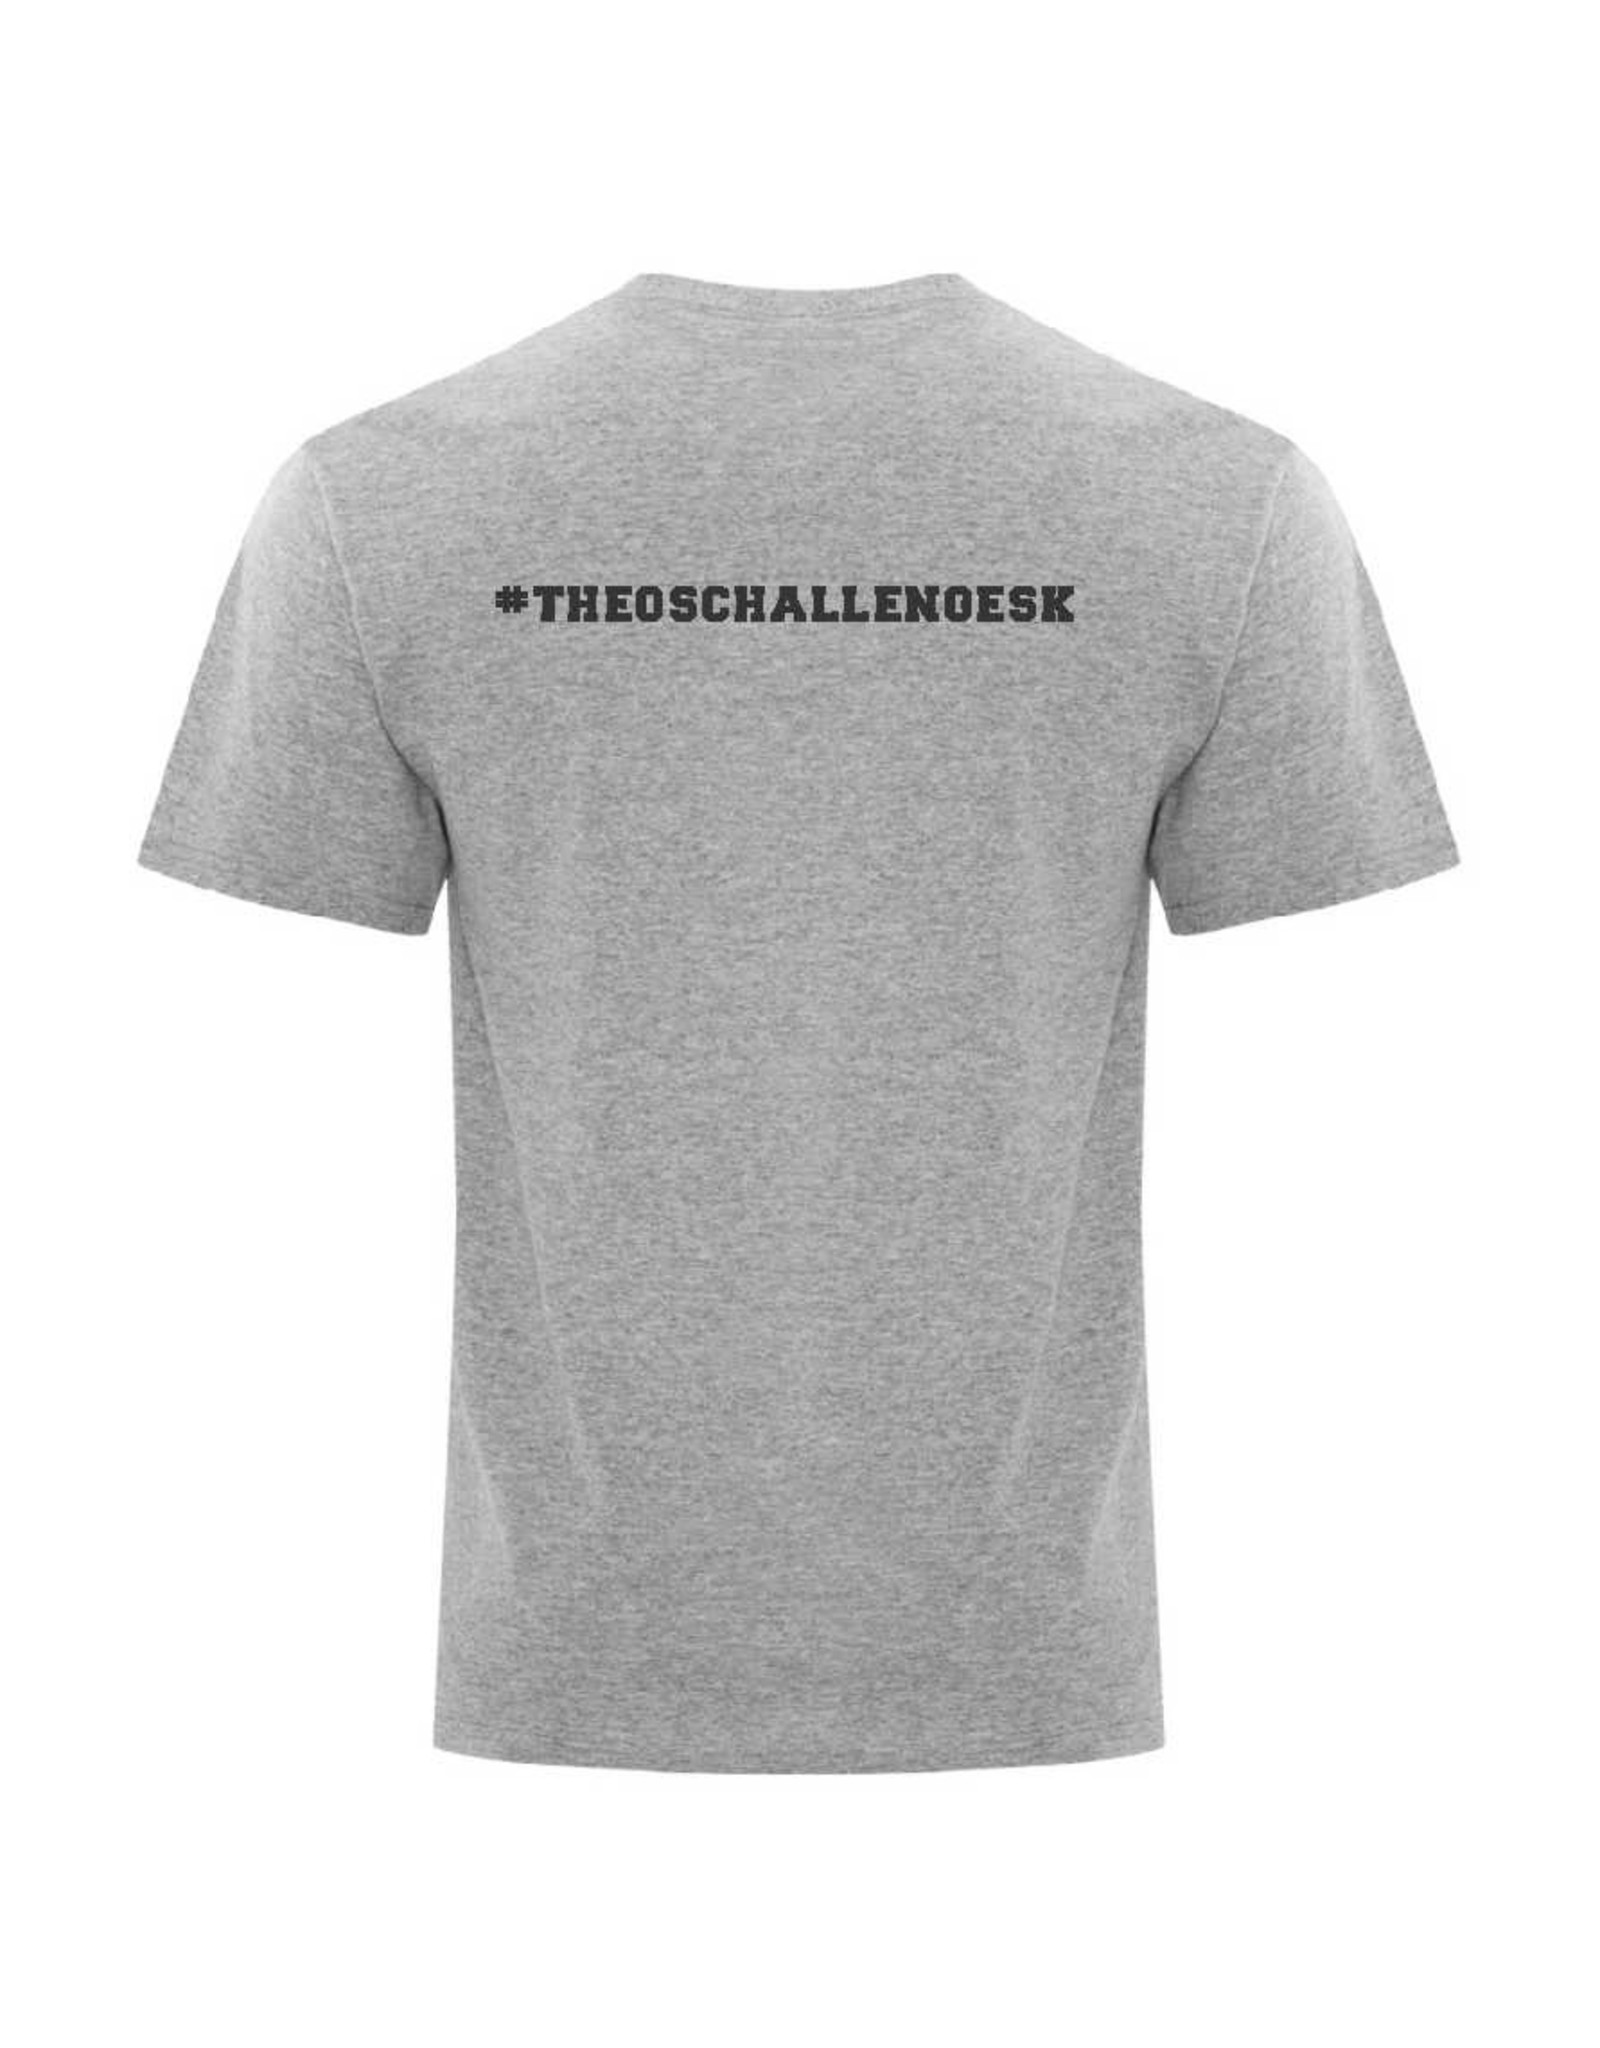 Theo's Every Challenge is Possible T-Shirt